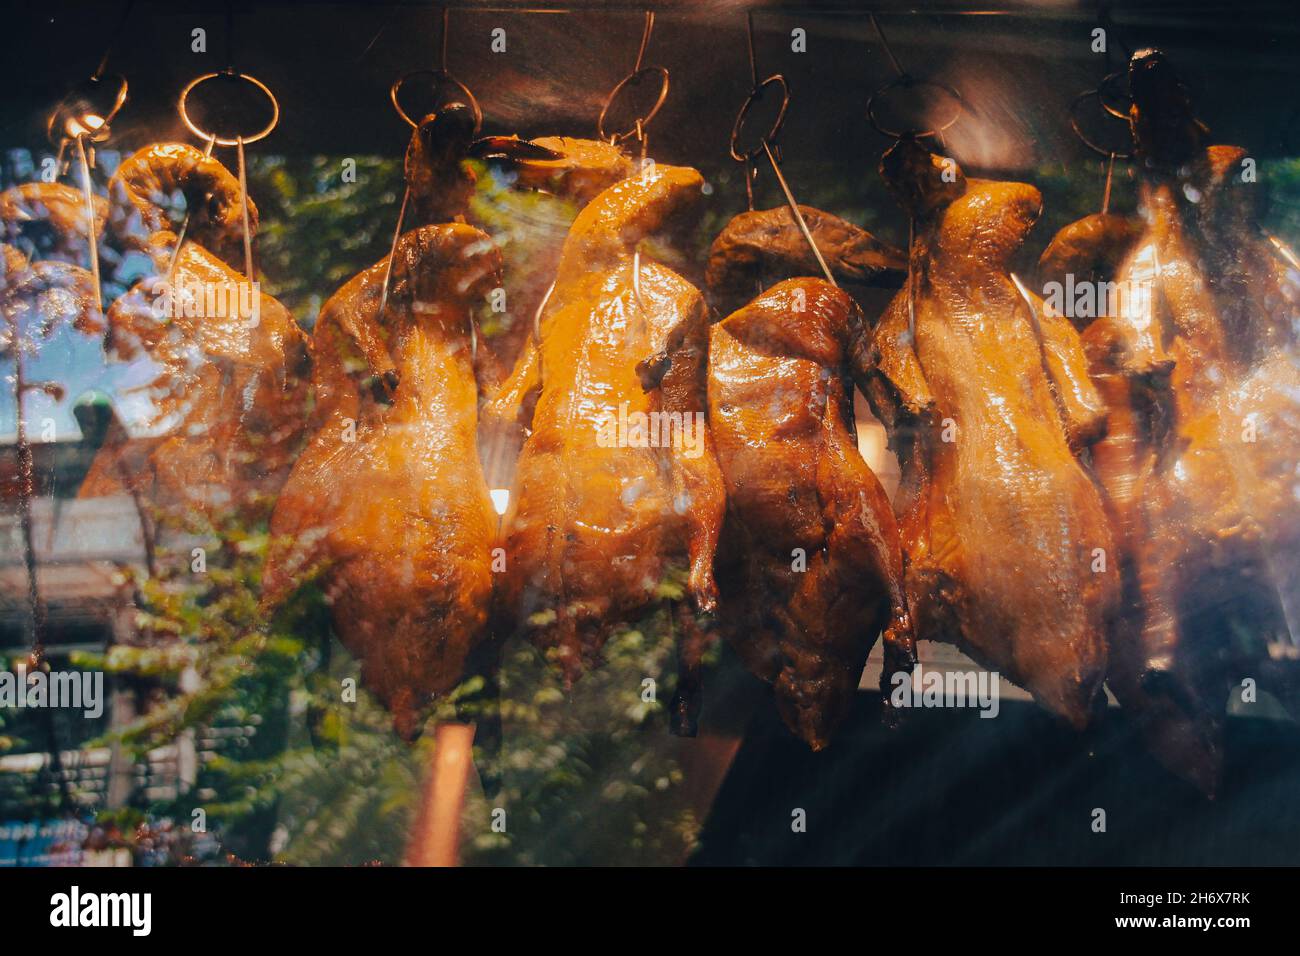 Famous vietnamese roasted ducks called Vit quay displayed behind a glass covered street food stall in Hanoi, Vietnam Stock Photo